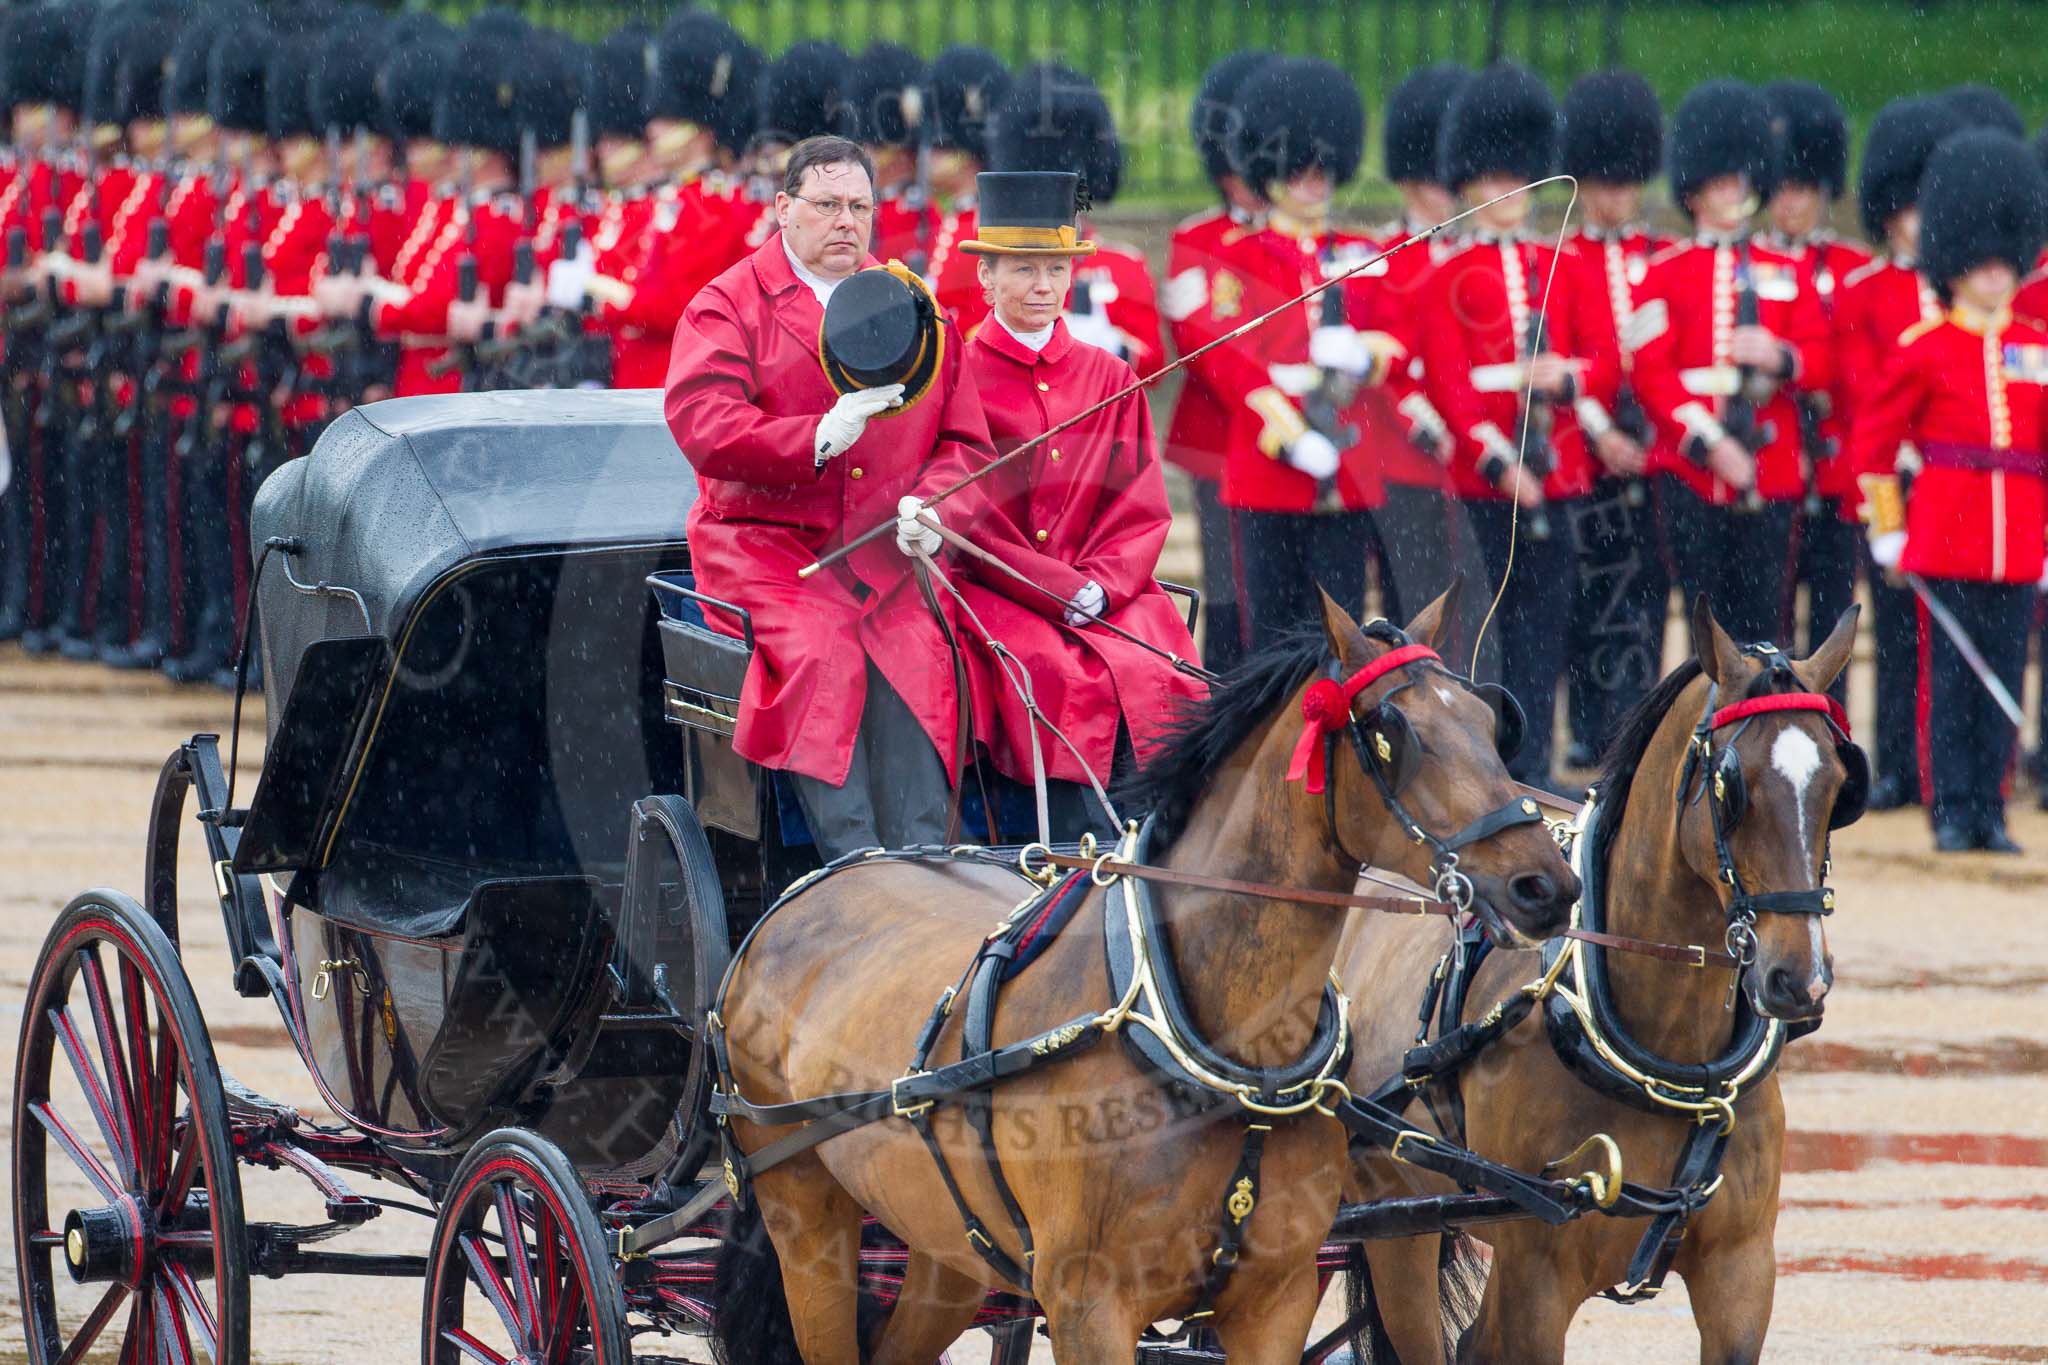 The Colonel's Review 2014.
Horse Guards Parade, Westminster,
London,

United Kingdom,
on 07 June 2014 at 10:51, image #206